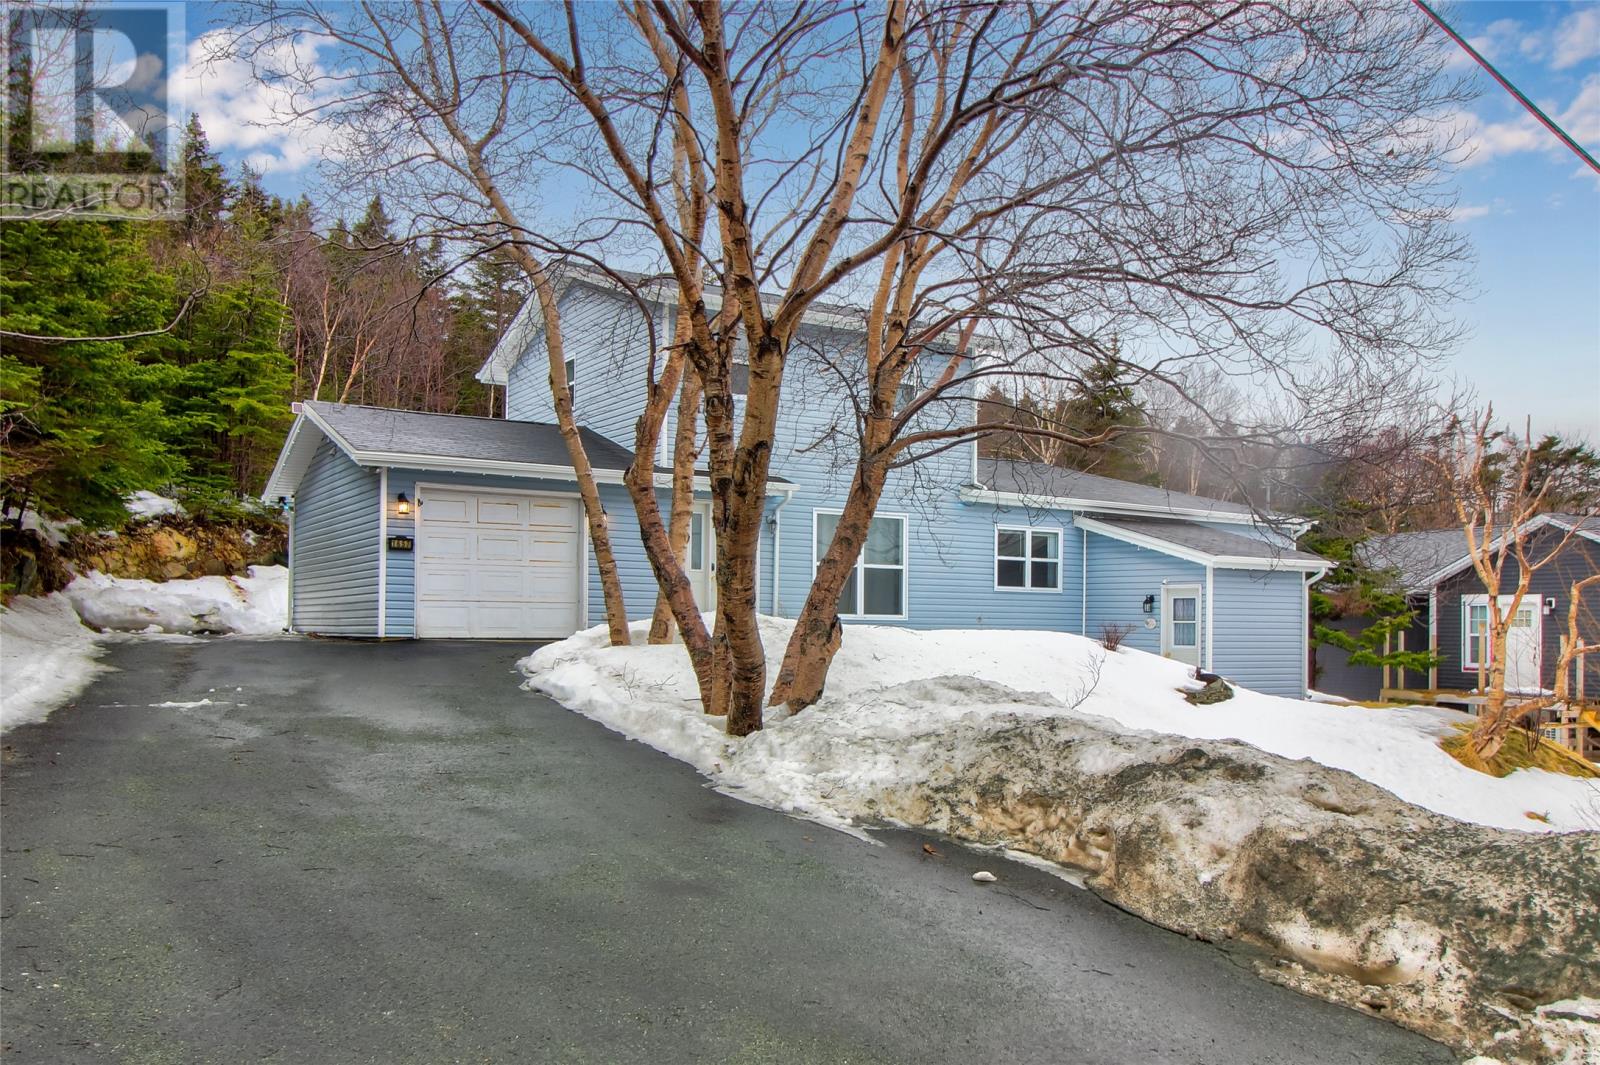 1657 Portugal Cove Road, Portugal Cove, A1M2S3, 4 Bedrooms Bedrooms, ,2 BathroomsBathrooms,Single Family,For sale,Portugal Cove,1268432